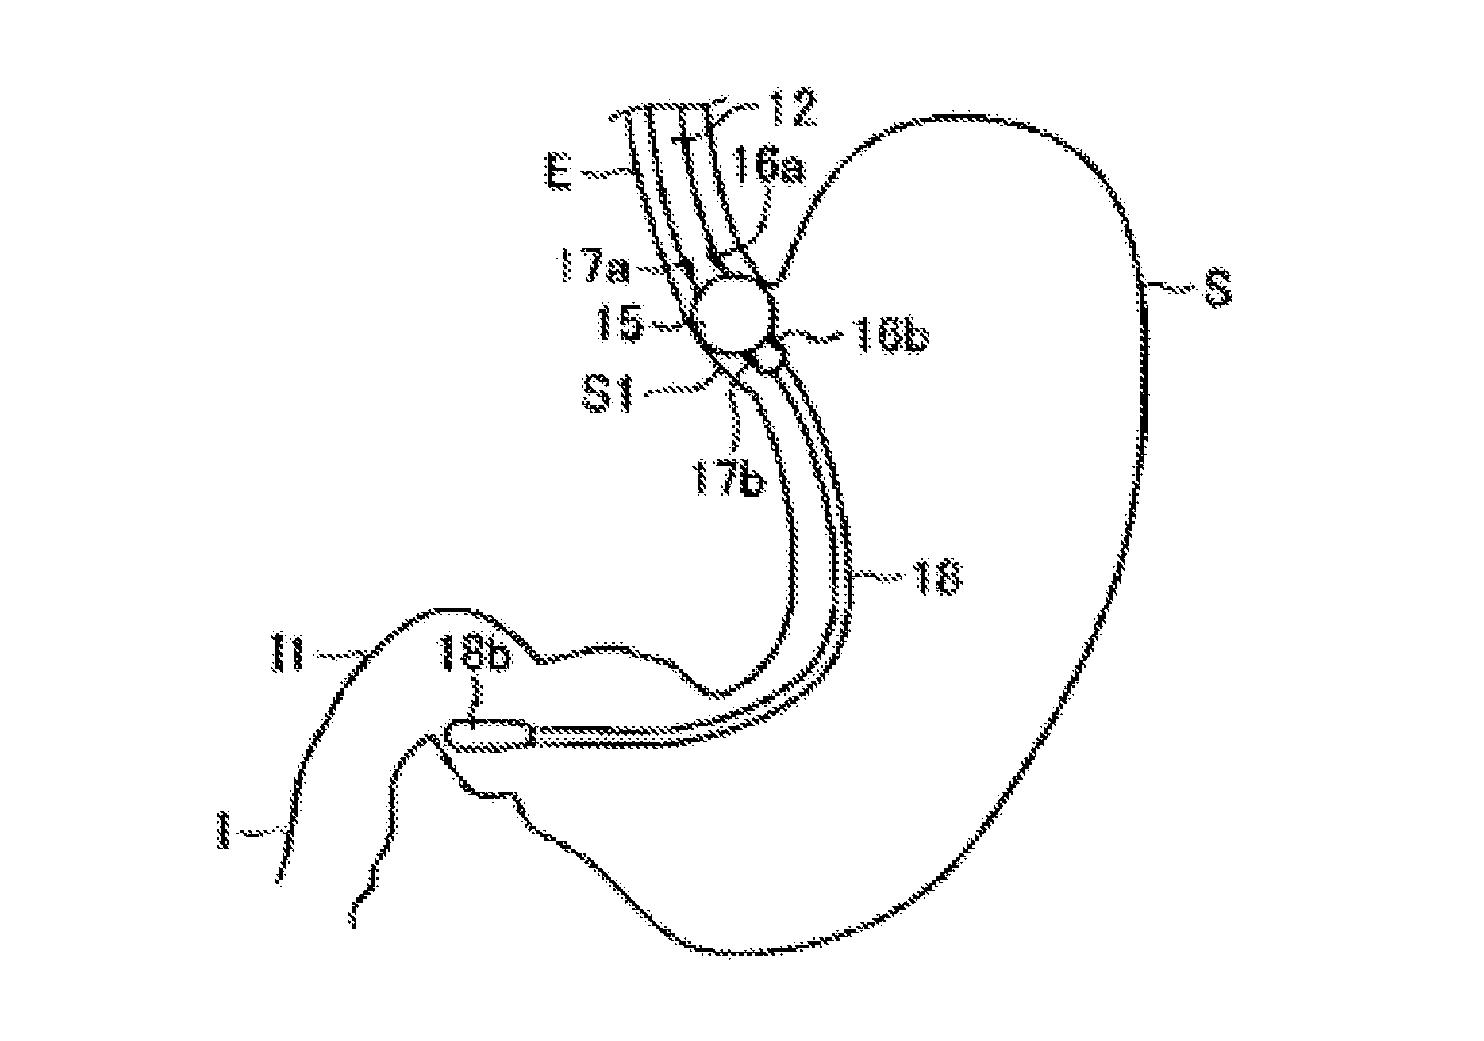 Tube for Gastrointestinal Tract